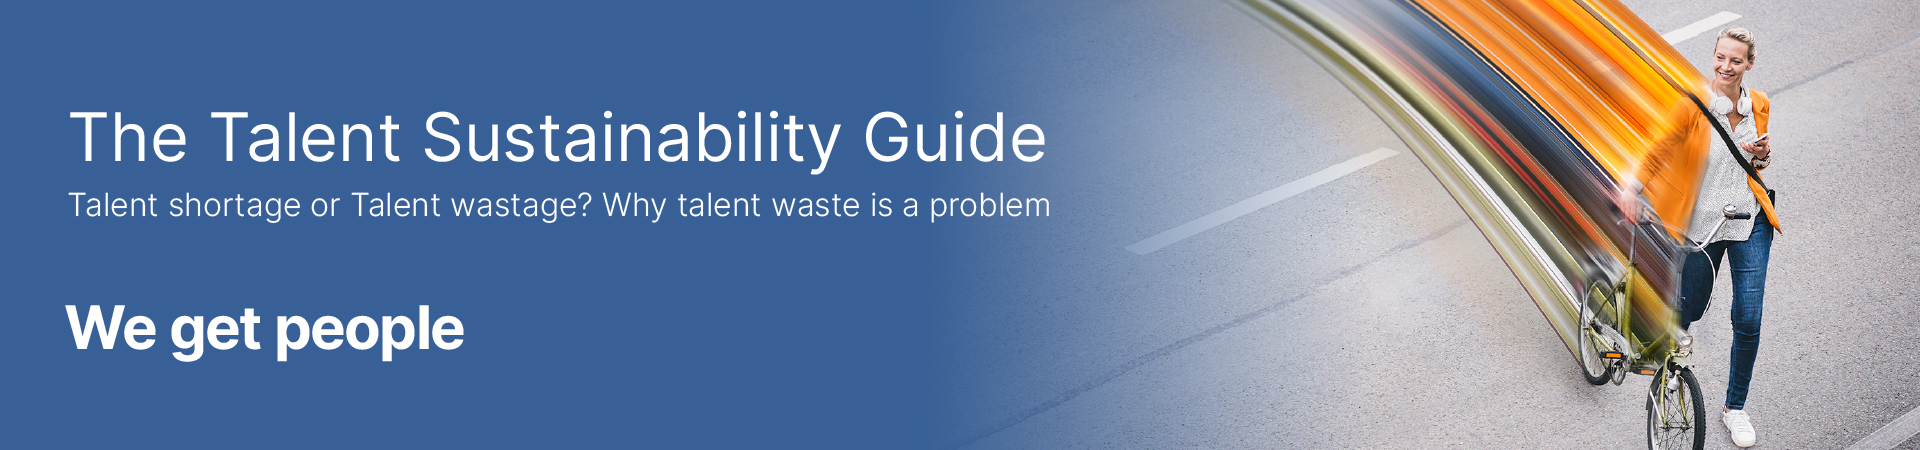 Talent Sustainability Guide